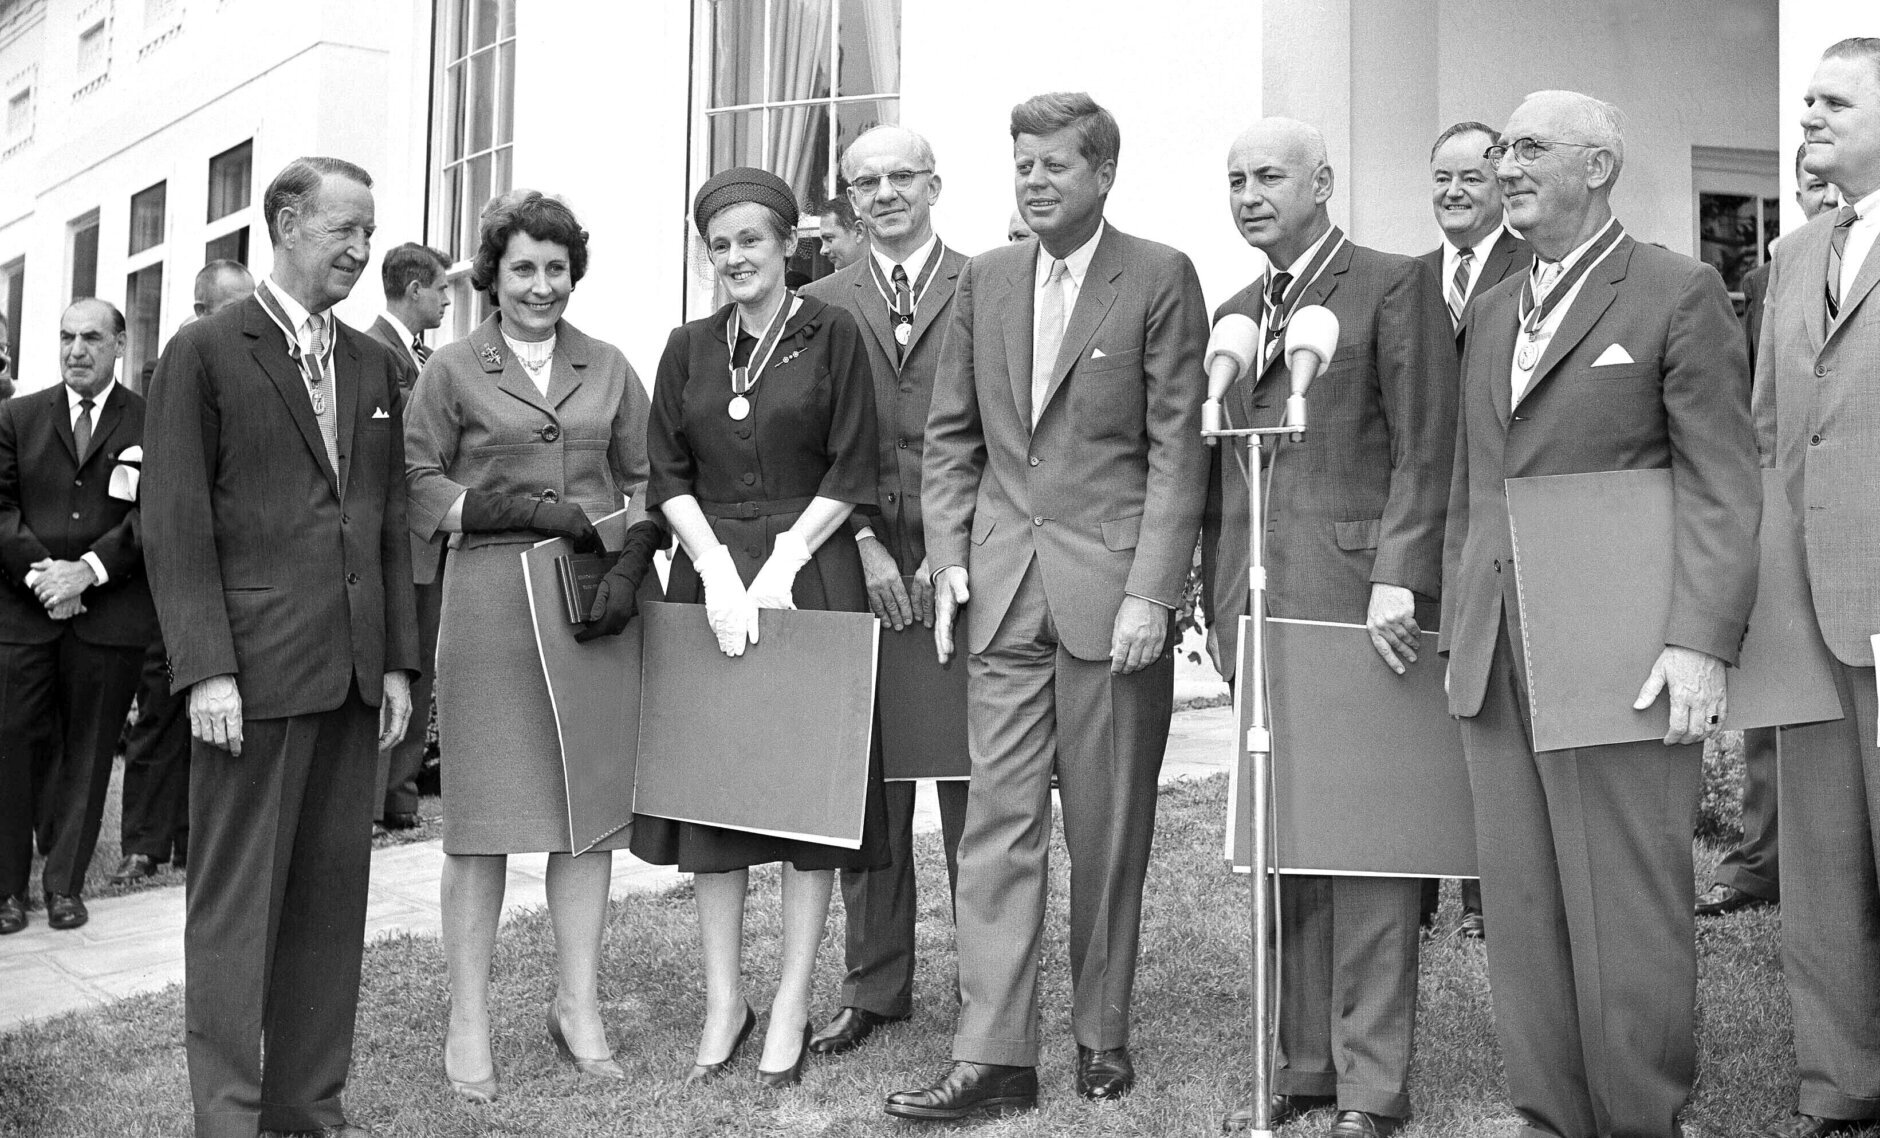 Dr. Frances Oldham Kelsey, third from left, the government medical officer who prevented the marketing of the drug Thalidomide in the United States, wears the distinguished Federal Civilian Service medal presented to her at the White House by President John F. Kennedy, center, Aug. 7, 1962. She said she was "impressed and overwhelmed." Others in the photo are unidentified. (AP Photo/John Rous)